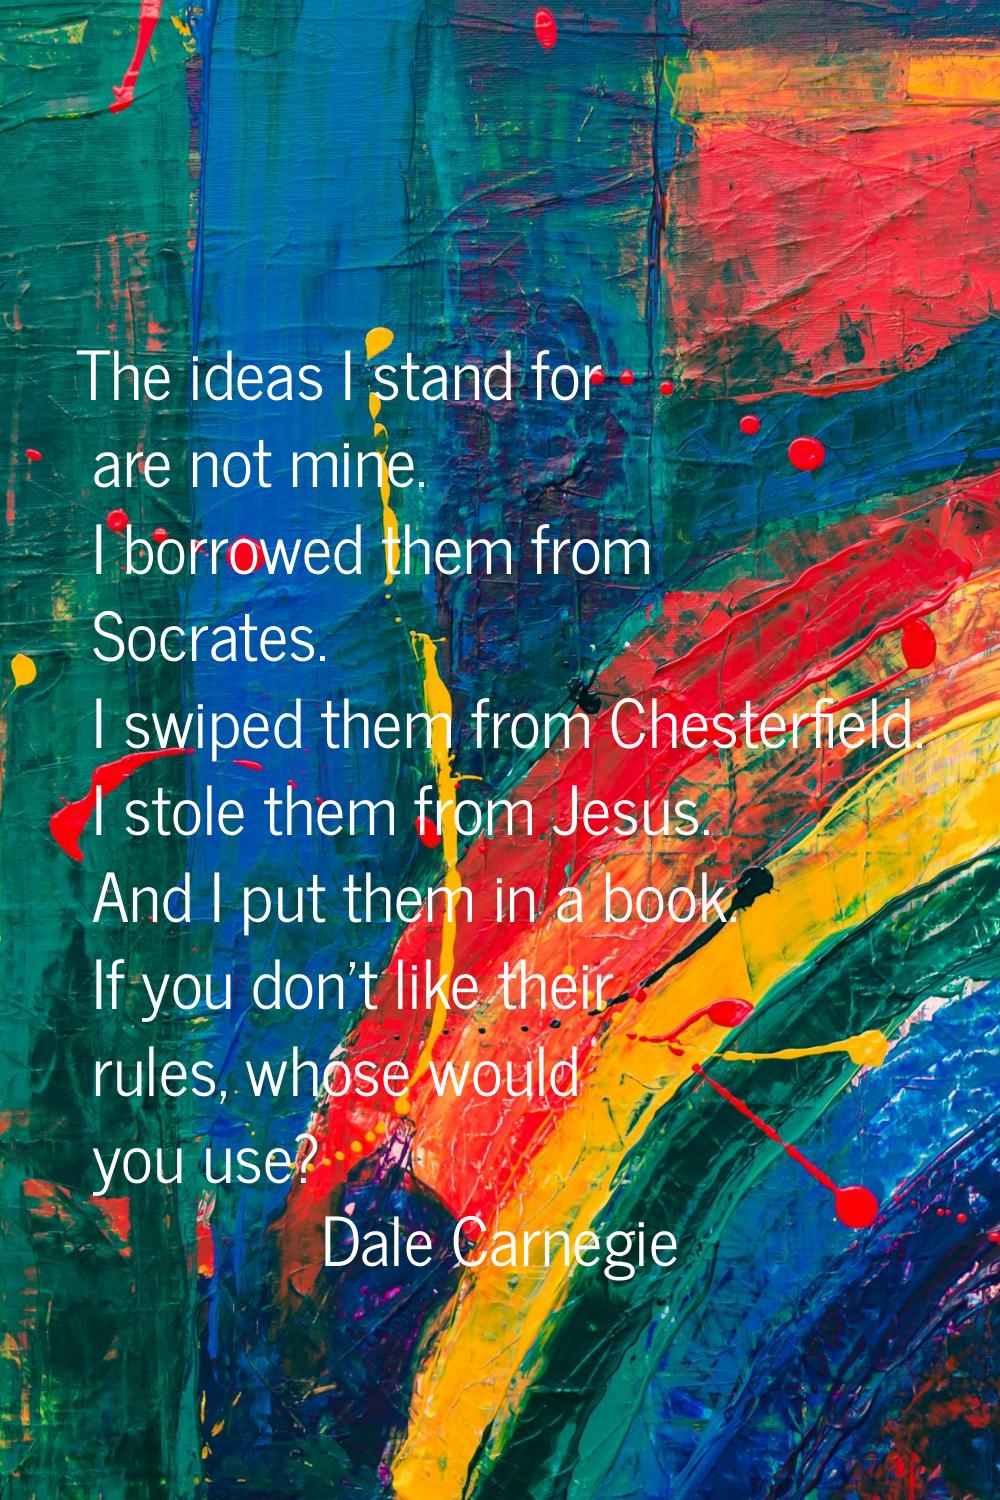 The ideas I stand for are not mine. I borrowed them from Socrates. I swiped them from Chesterfield.